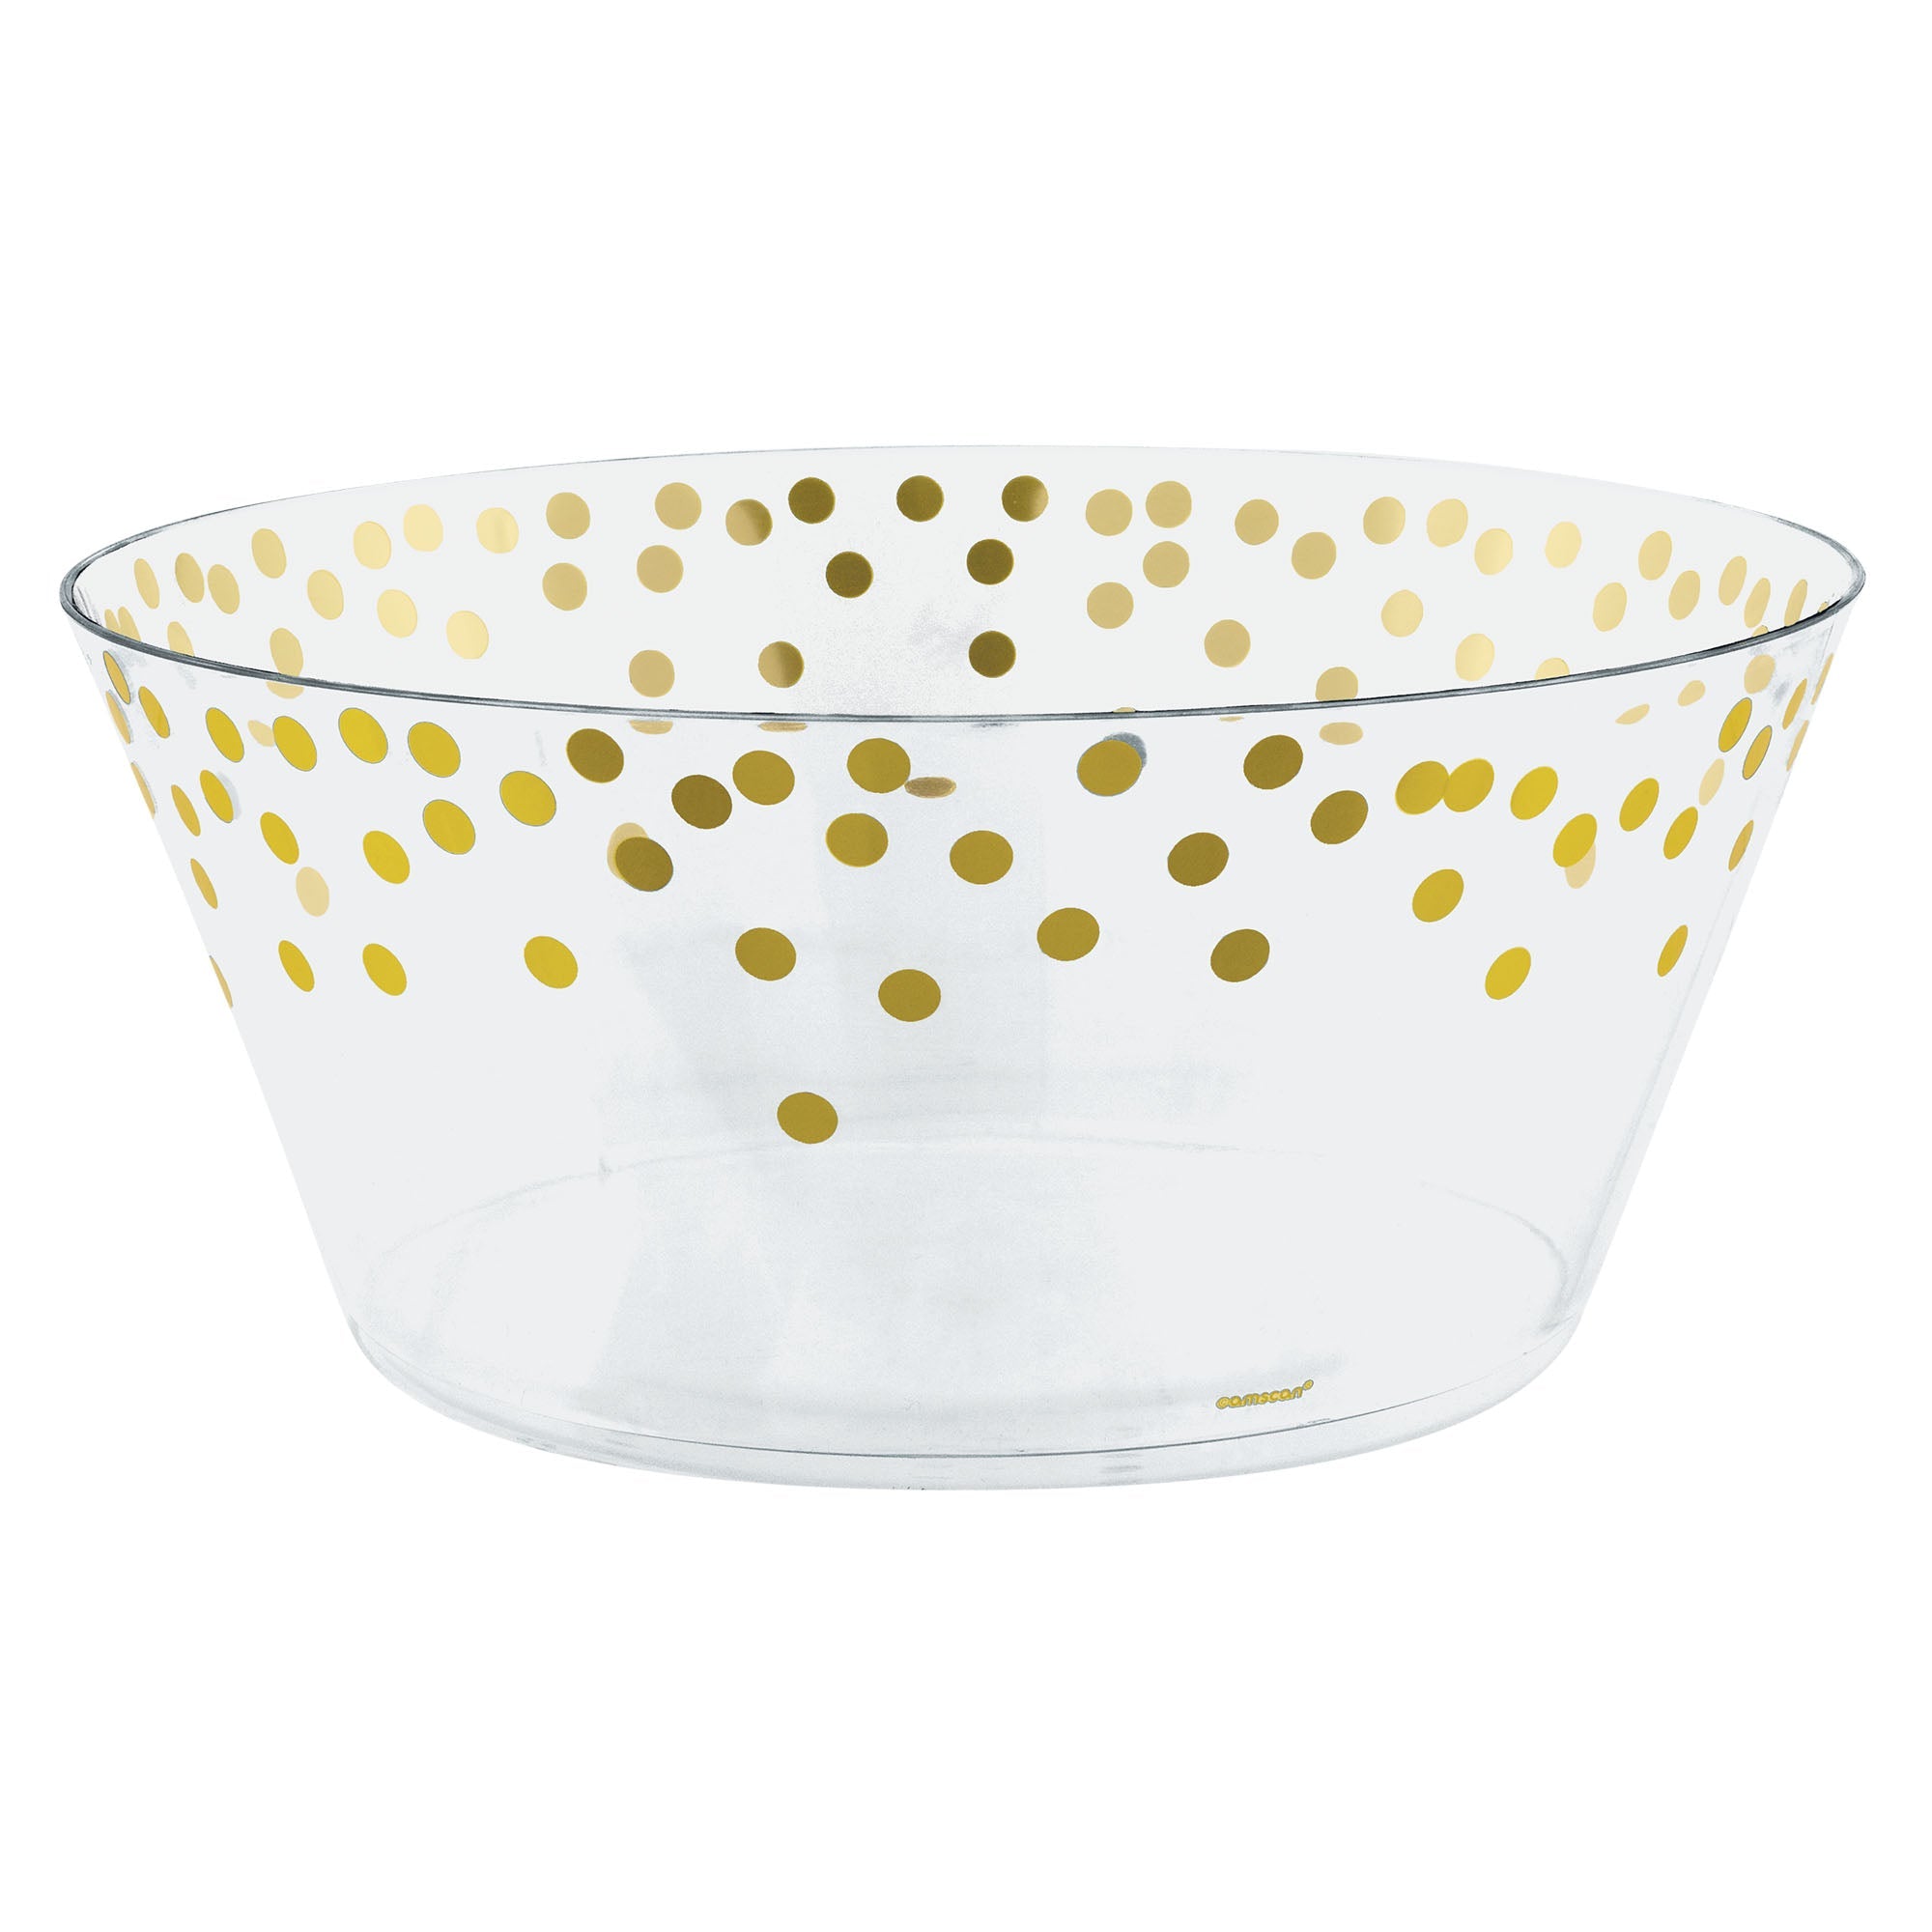 Dots Large Serving Bowl  Hot-stamped Plastic  10in  116.7oz